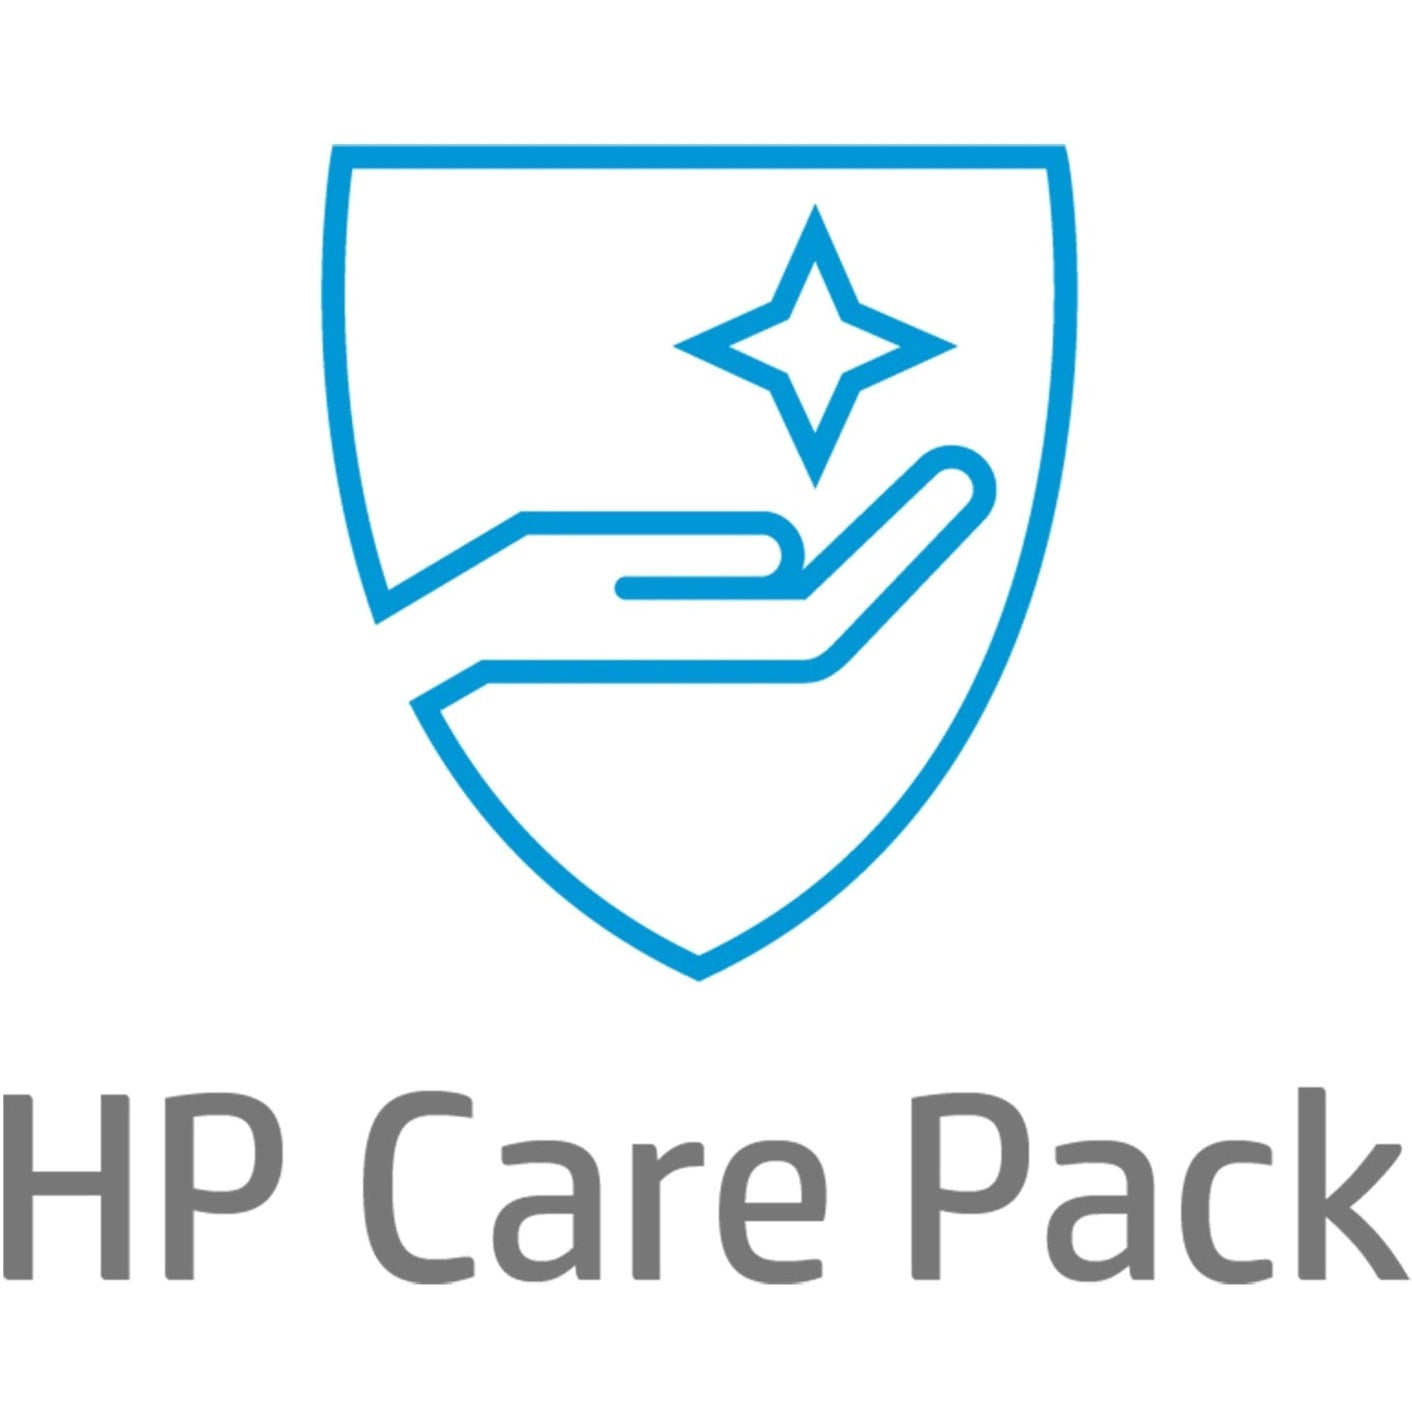 HP Care Pack Maintenance Kit Replacement Service - Extended Warranty - Warranty (U9PS8E)